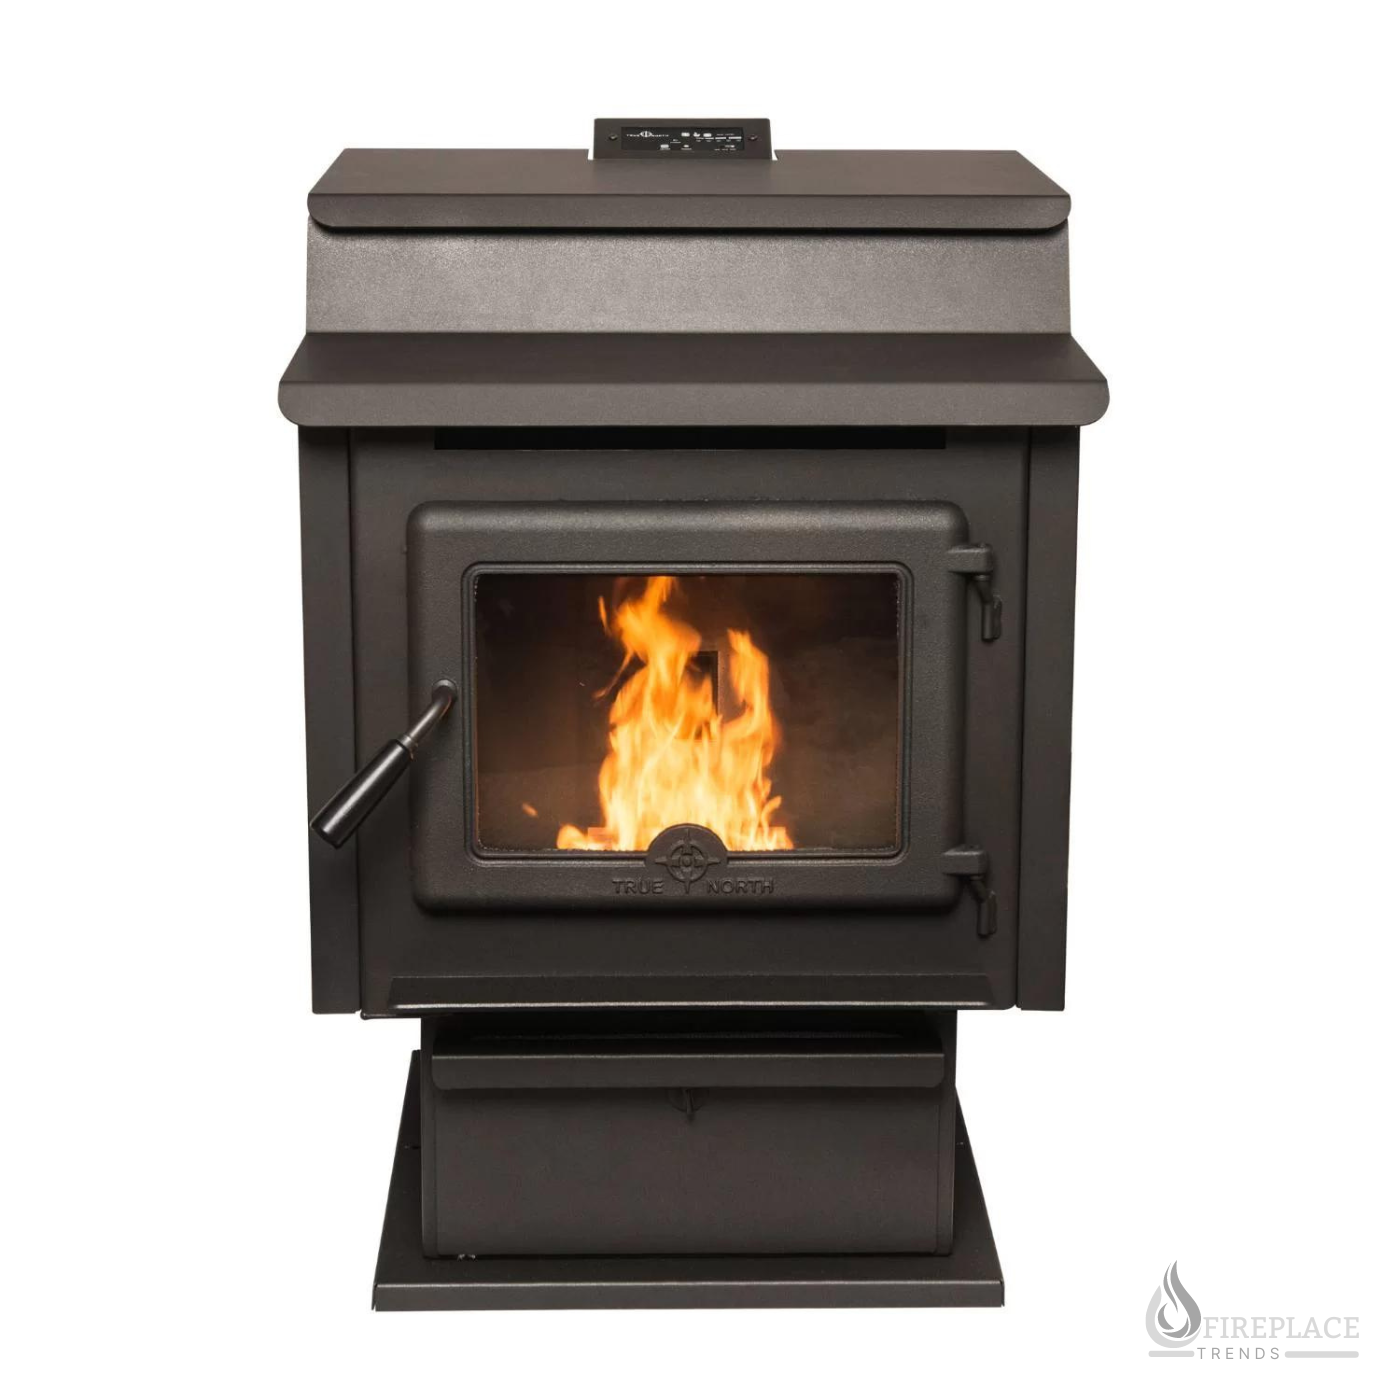 True North - TN40 Stylish Pellet Stove With Legs & Thermostat